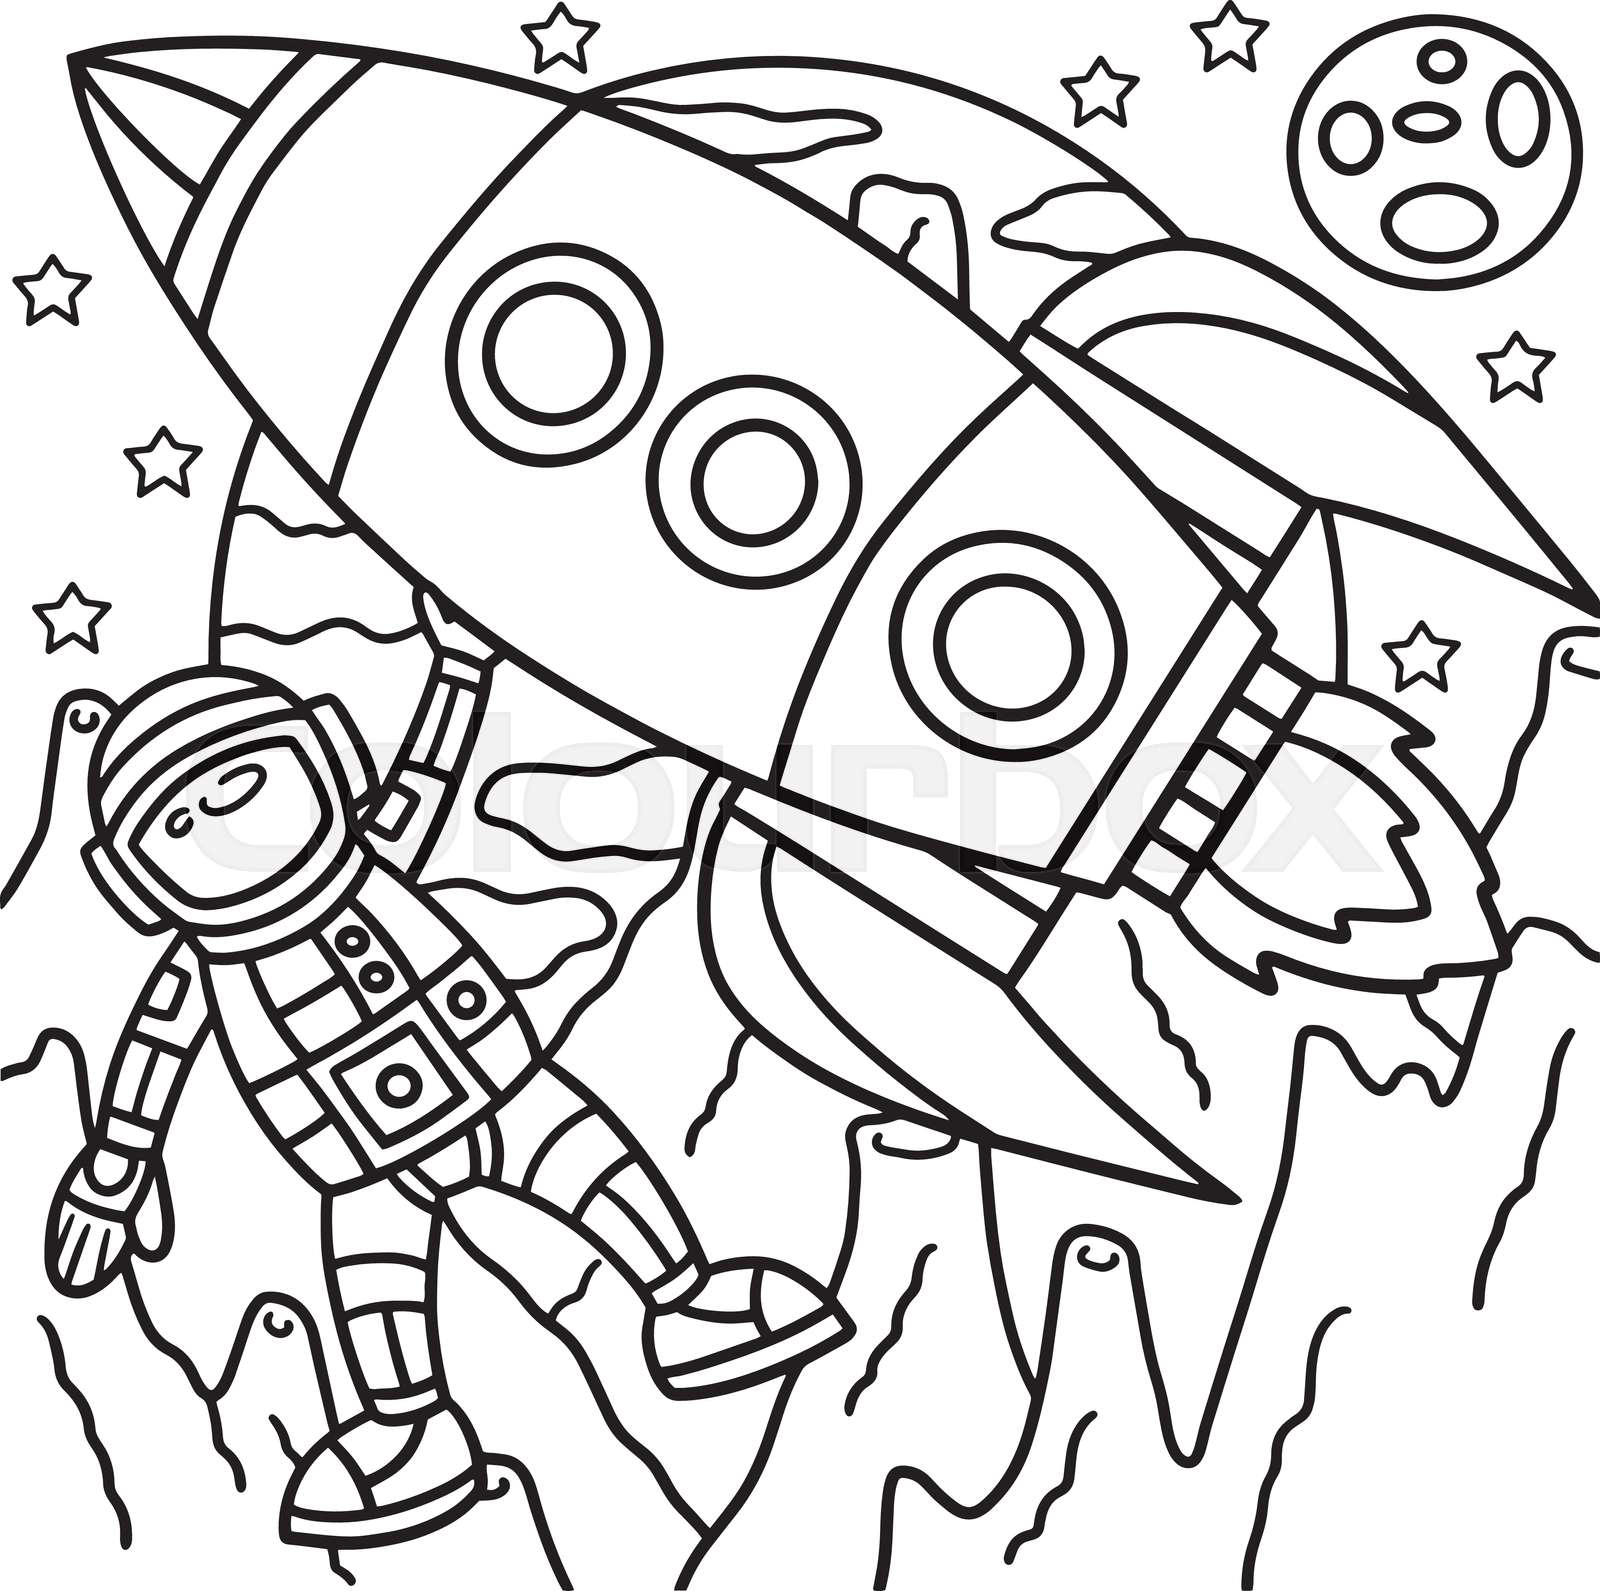 Astronaut Space Rocket Ship Coloring Page for Kids | Stock vector |  Colourbox